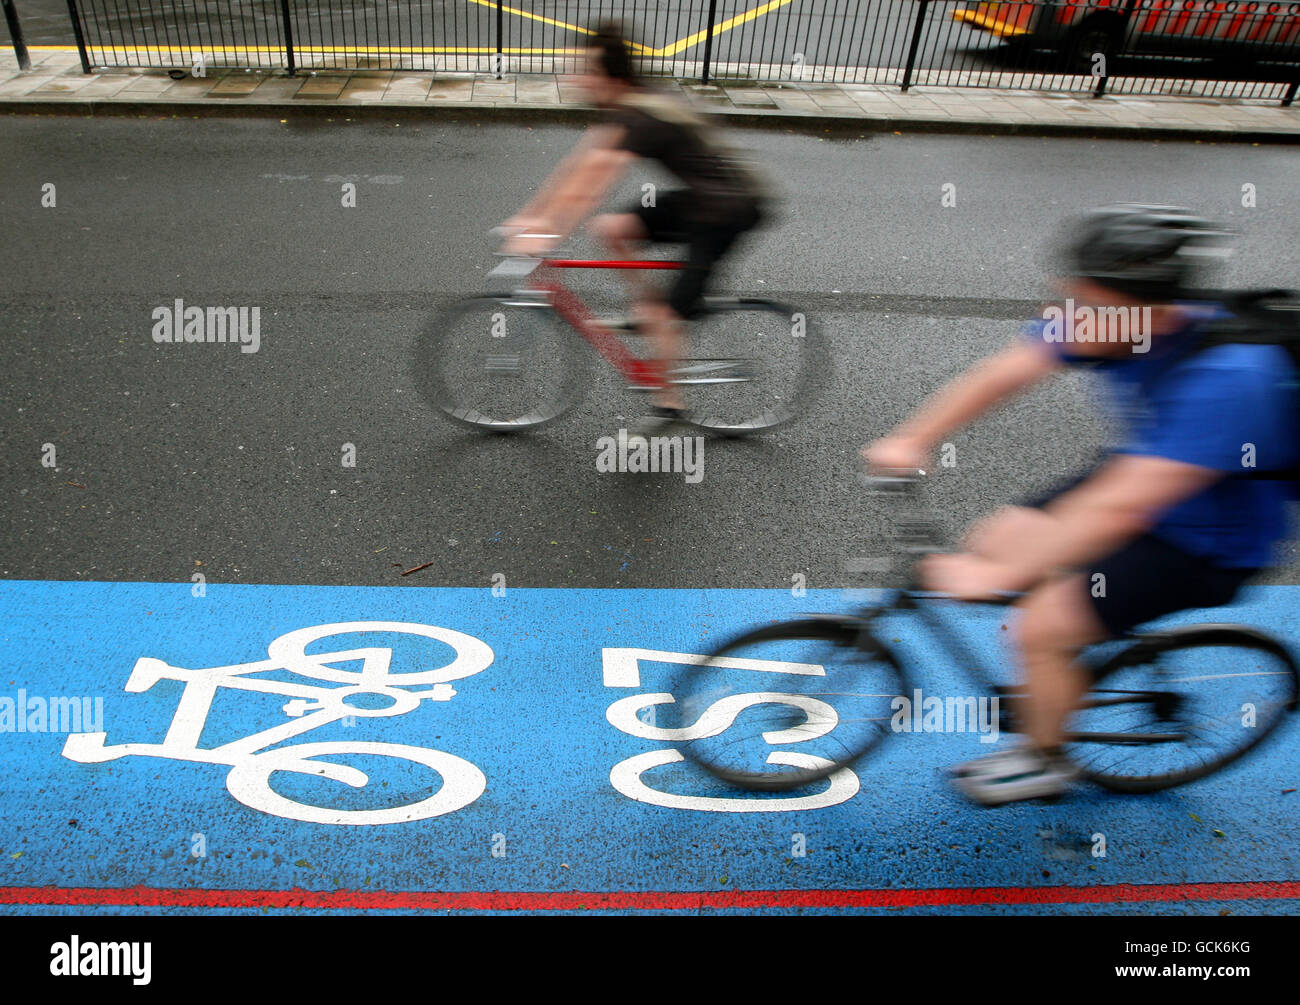 Cycle Superhighway - London. Cyclists rides on a cycle superhighway, in Kennington, central London Stock Photo